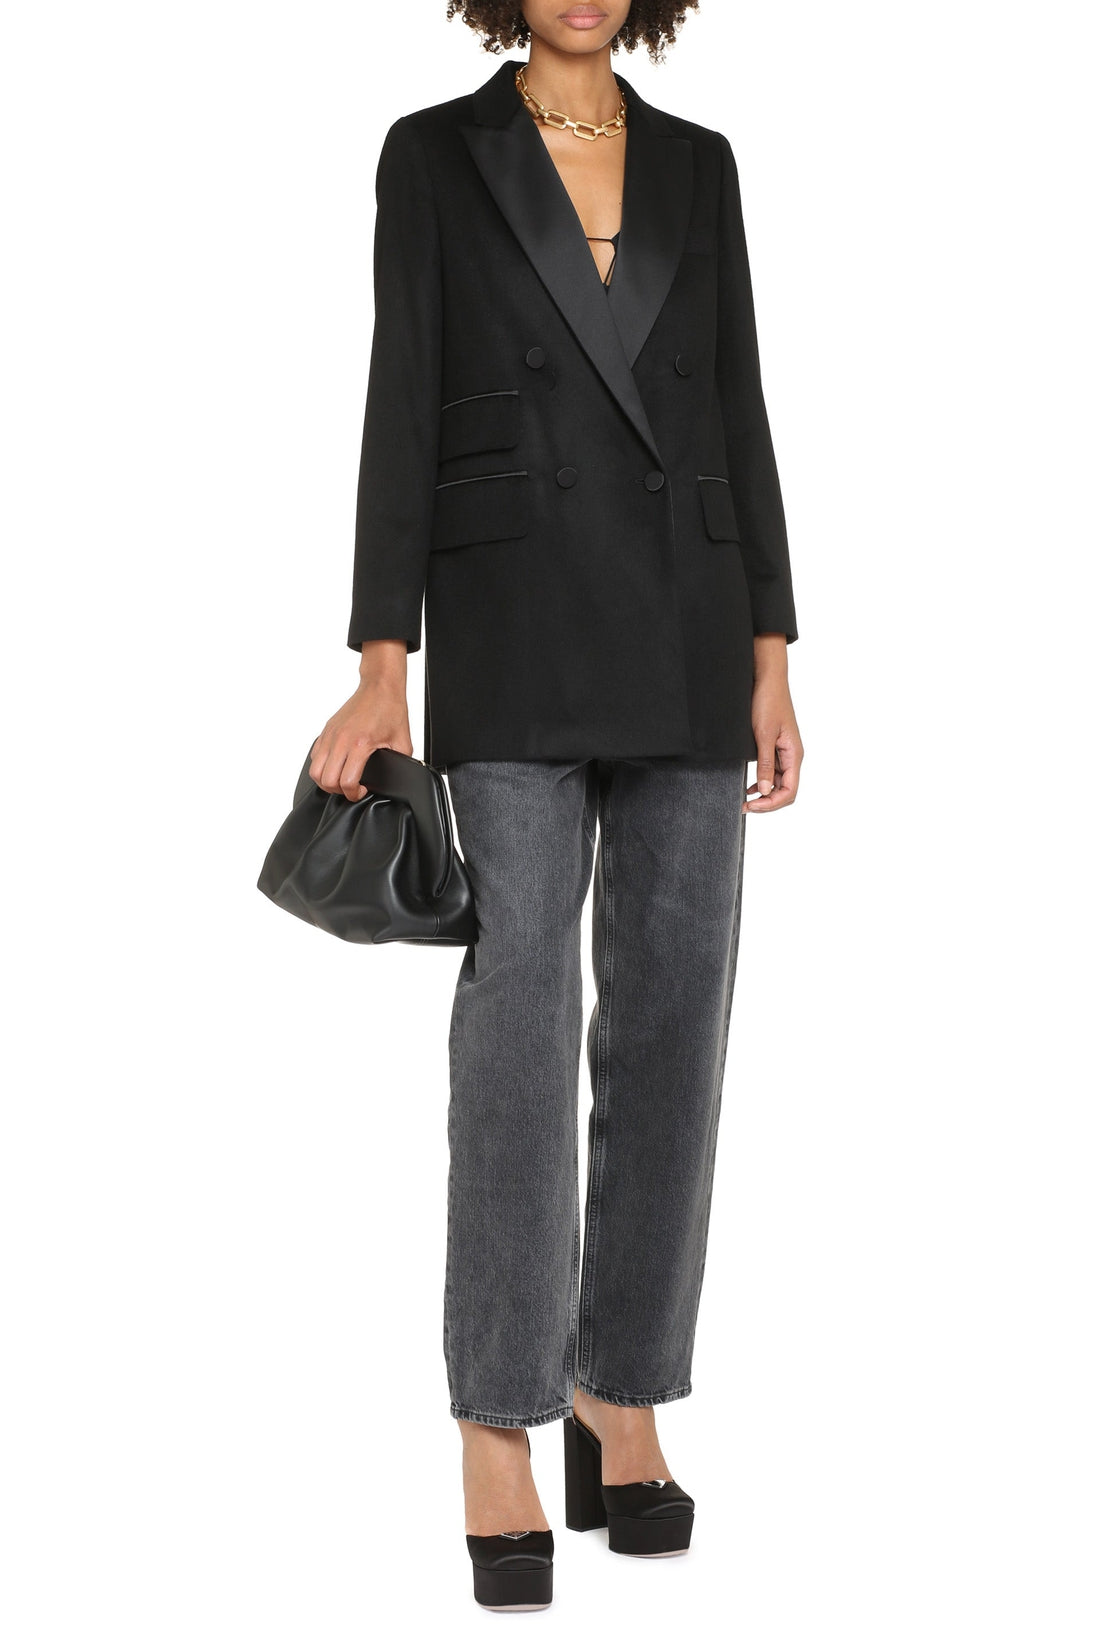 Max Mara-OUTLET-SALE-Emiro double-breasted camel-wool blazer-ARCHIVIST